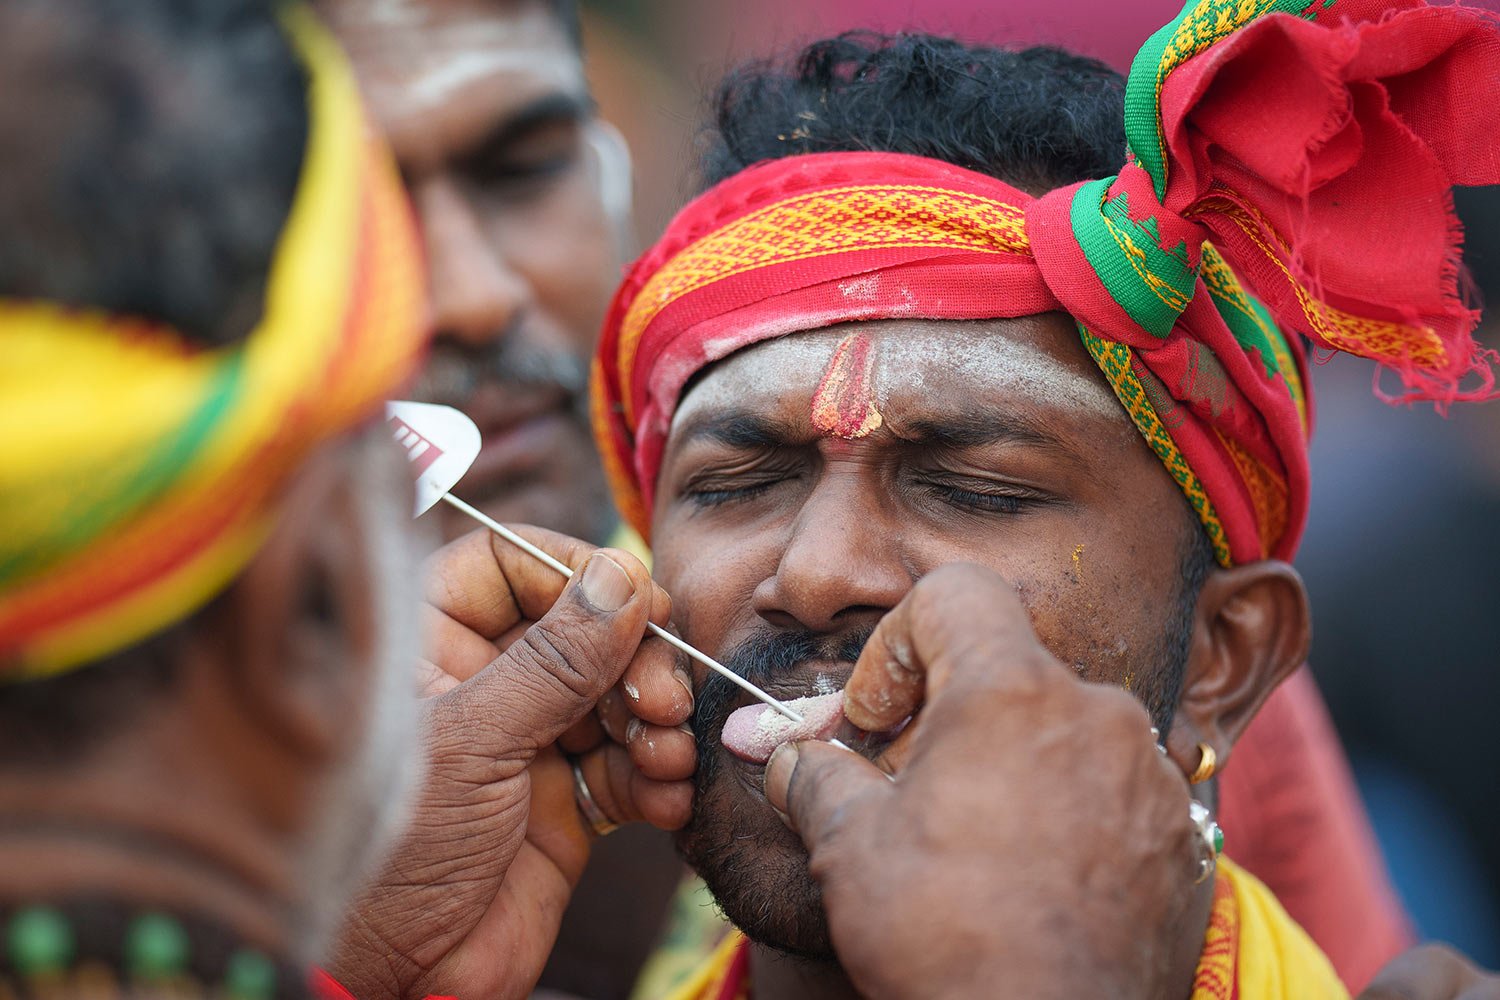  A Hindu devotee gets his tongue pierced with a metal rod during the Thaipusam festival celebrations at Batu Caves, in Kuala Lumpur, Malaysia, Sunday, Feb. 5, 2023.  (AP Photo/Vincent Thian) 